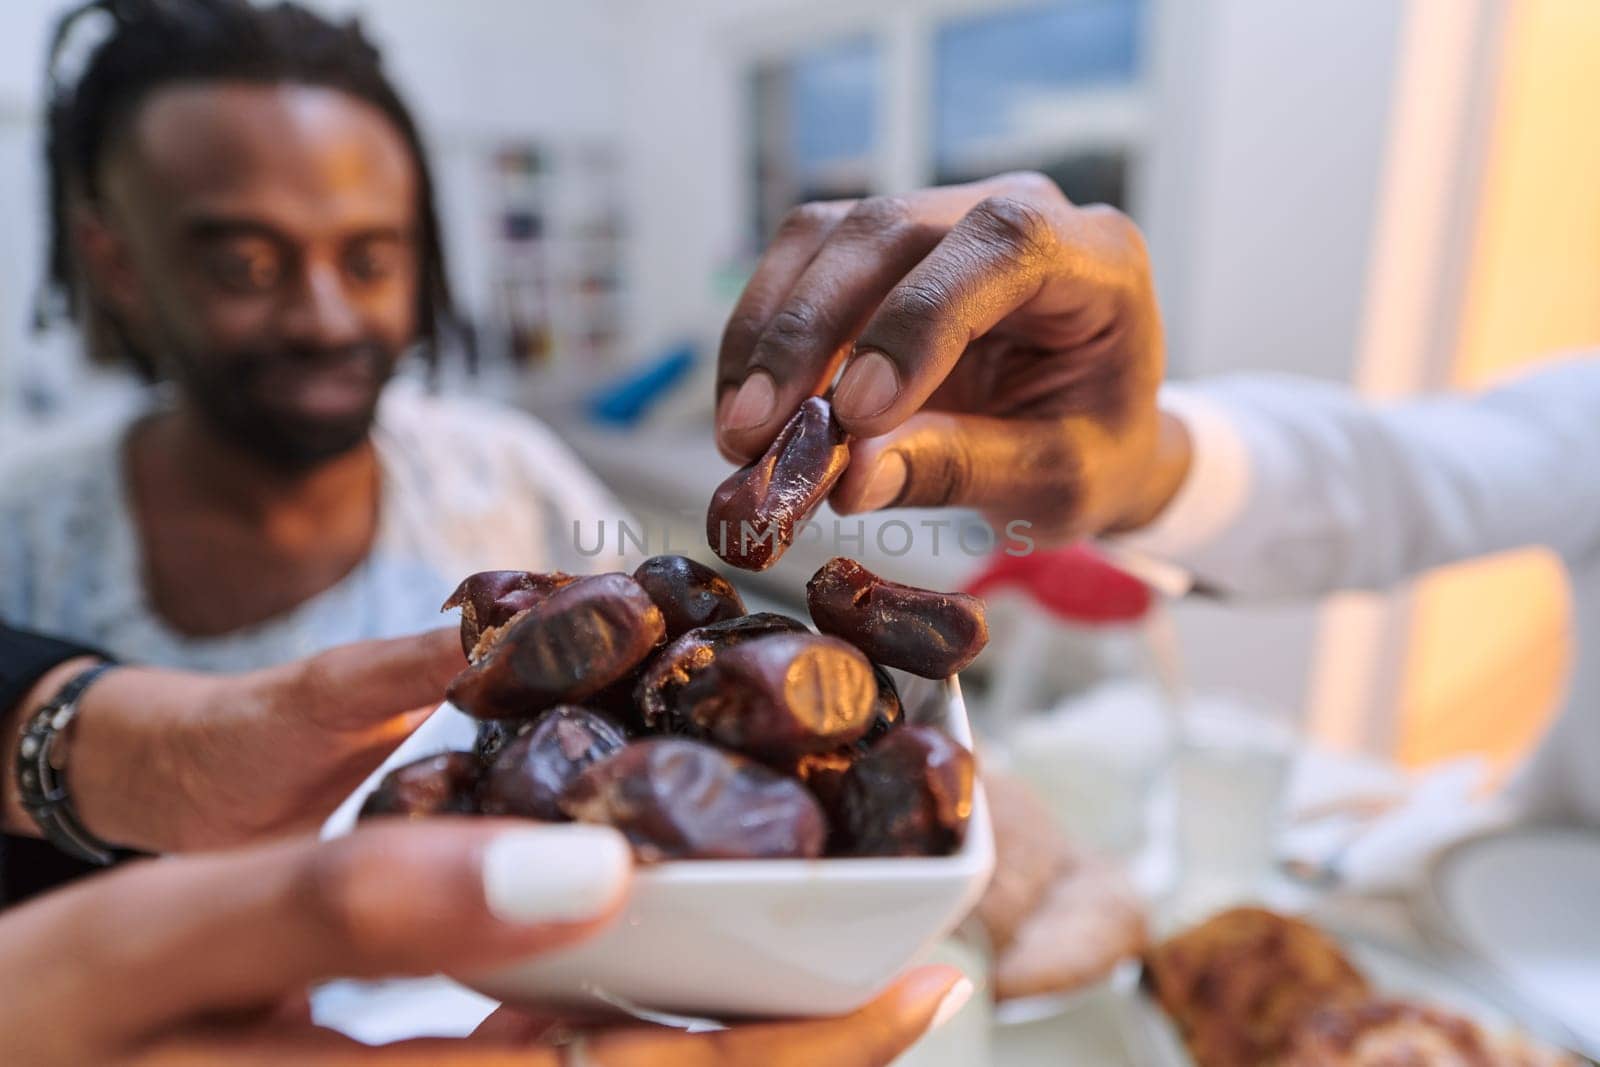 In a poignant close-up, the diverse hands of a Muslim family delicately grasp fresh dates, symbolizing the breaking of the fast during the holy month of Ramadan, capturing a moment of cultural unity, shared tradition, and the joyous anticipation of communal iftar by dotshock